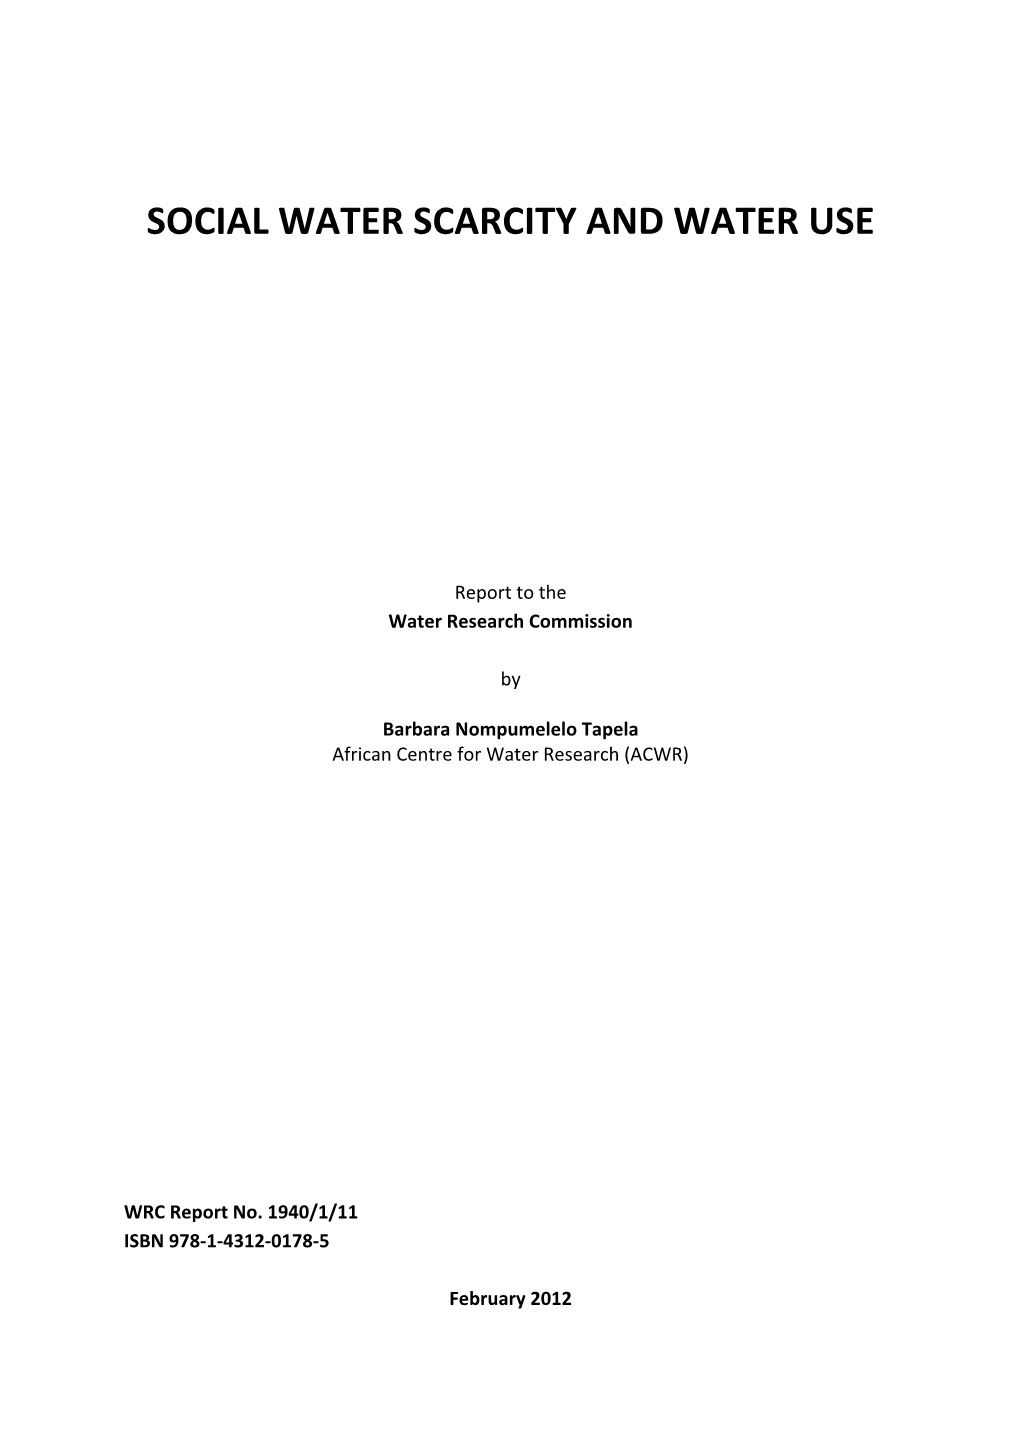 Water Scarcity and Water Use